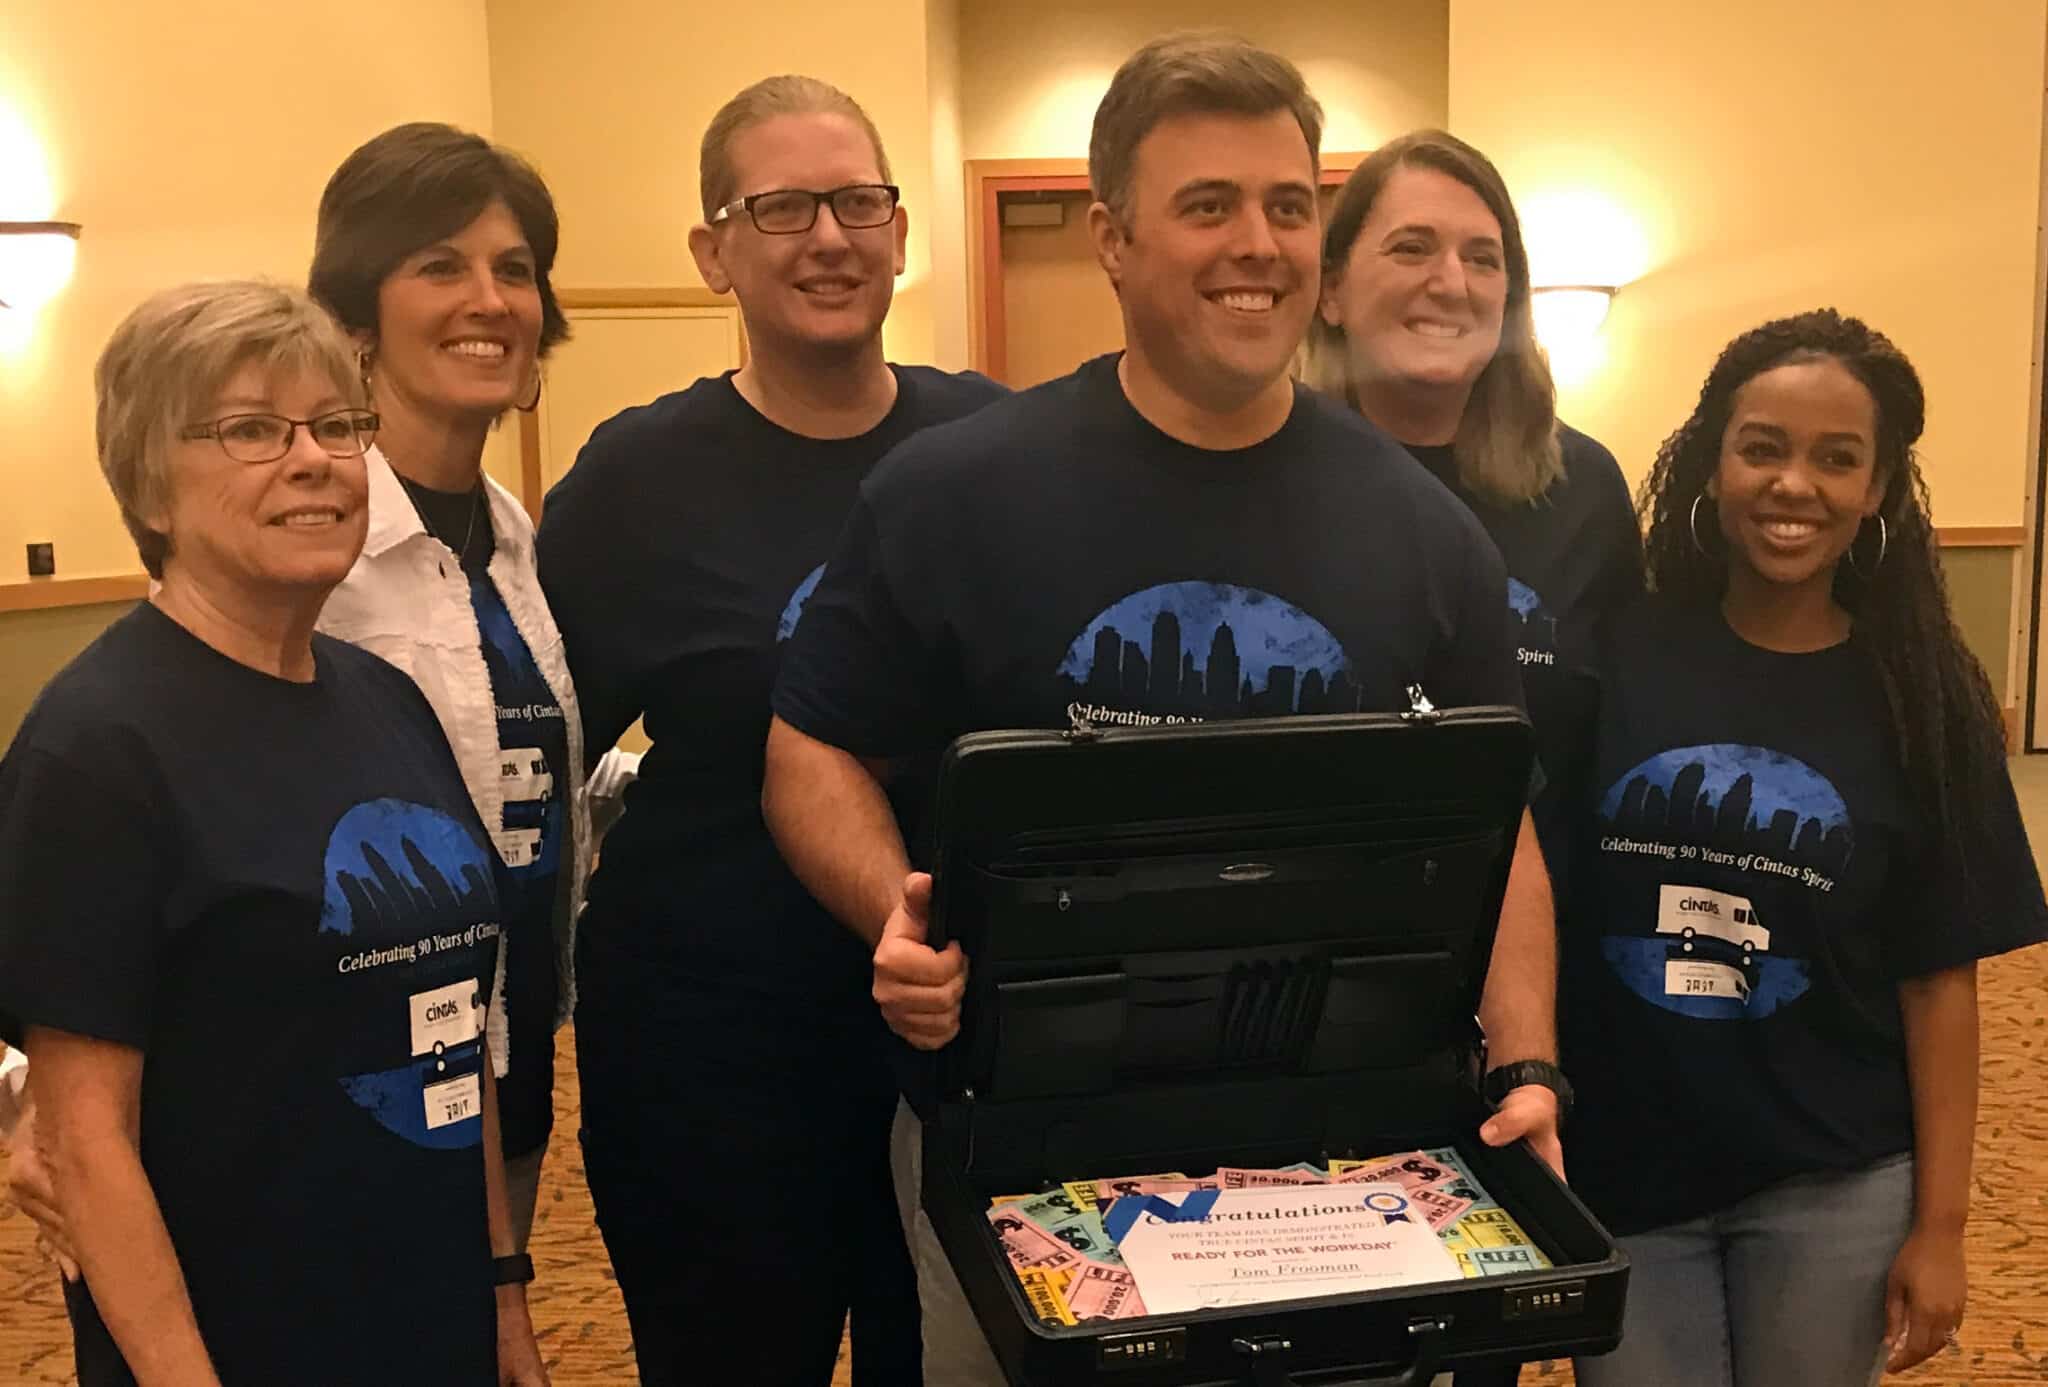 group of people posing with an open briefcase